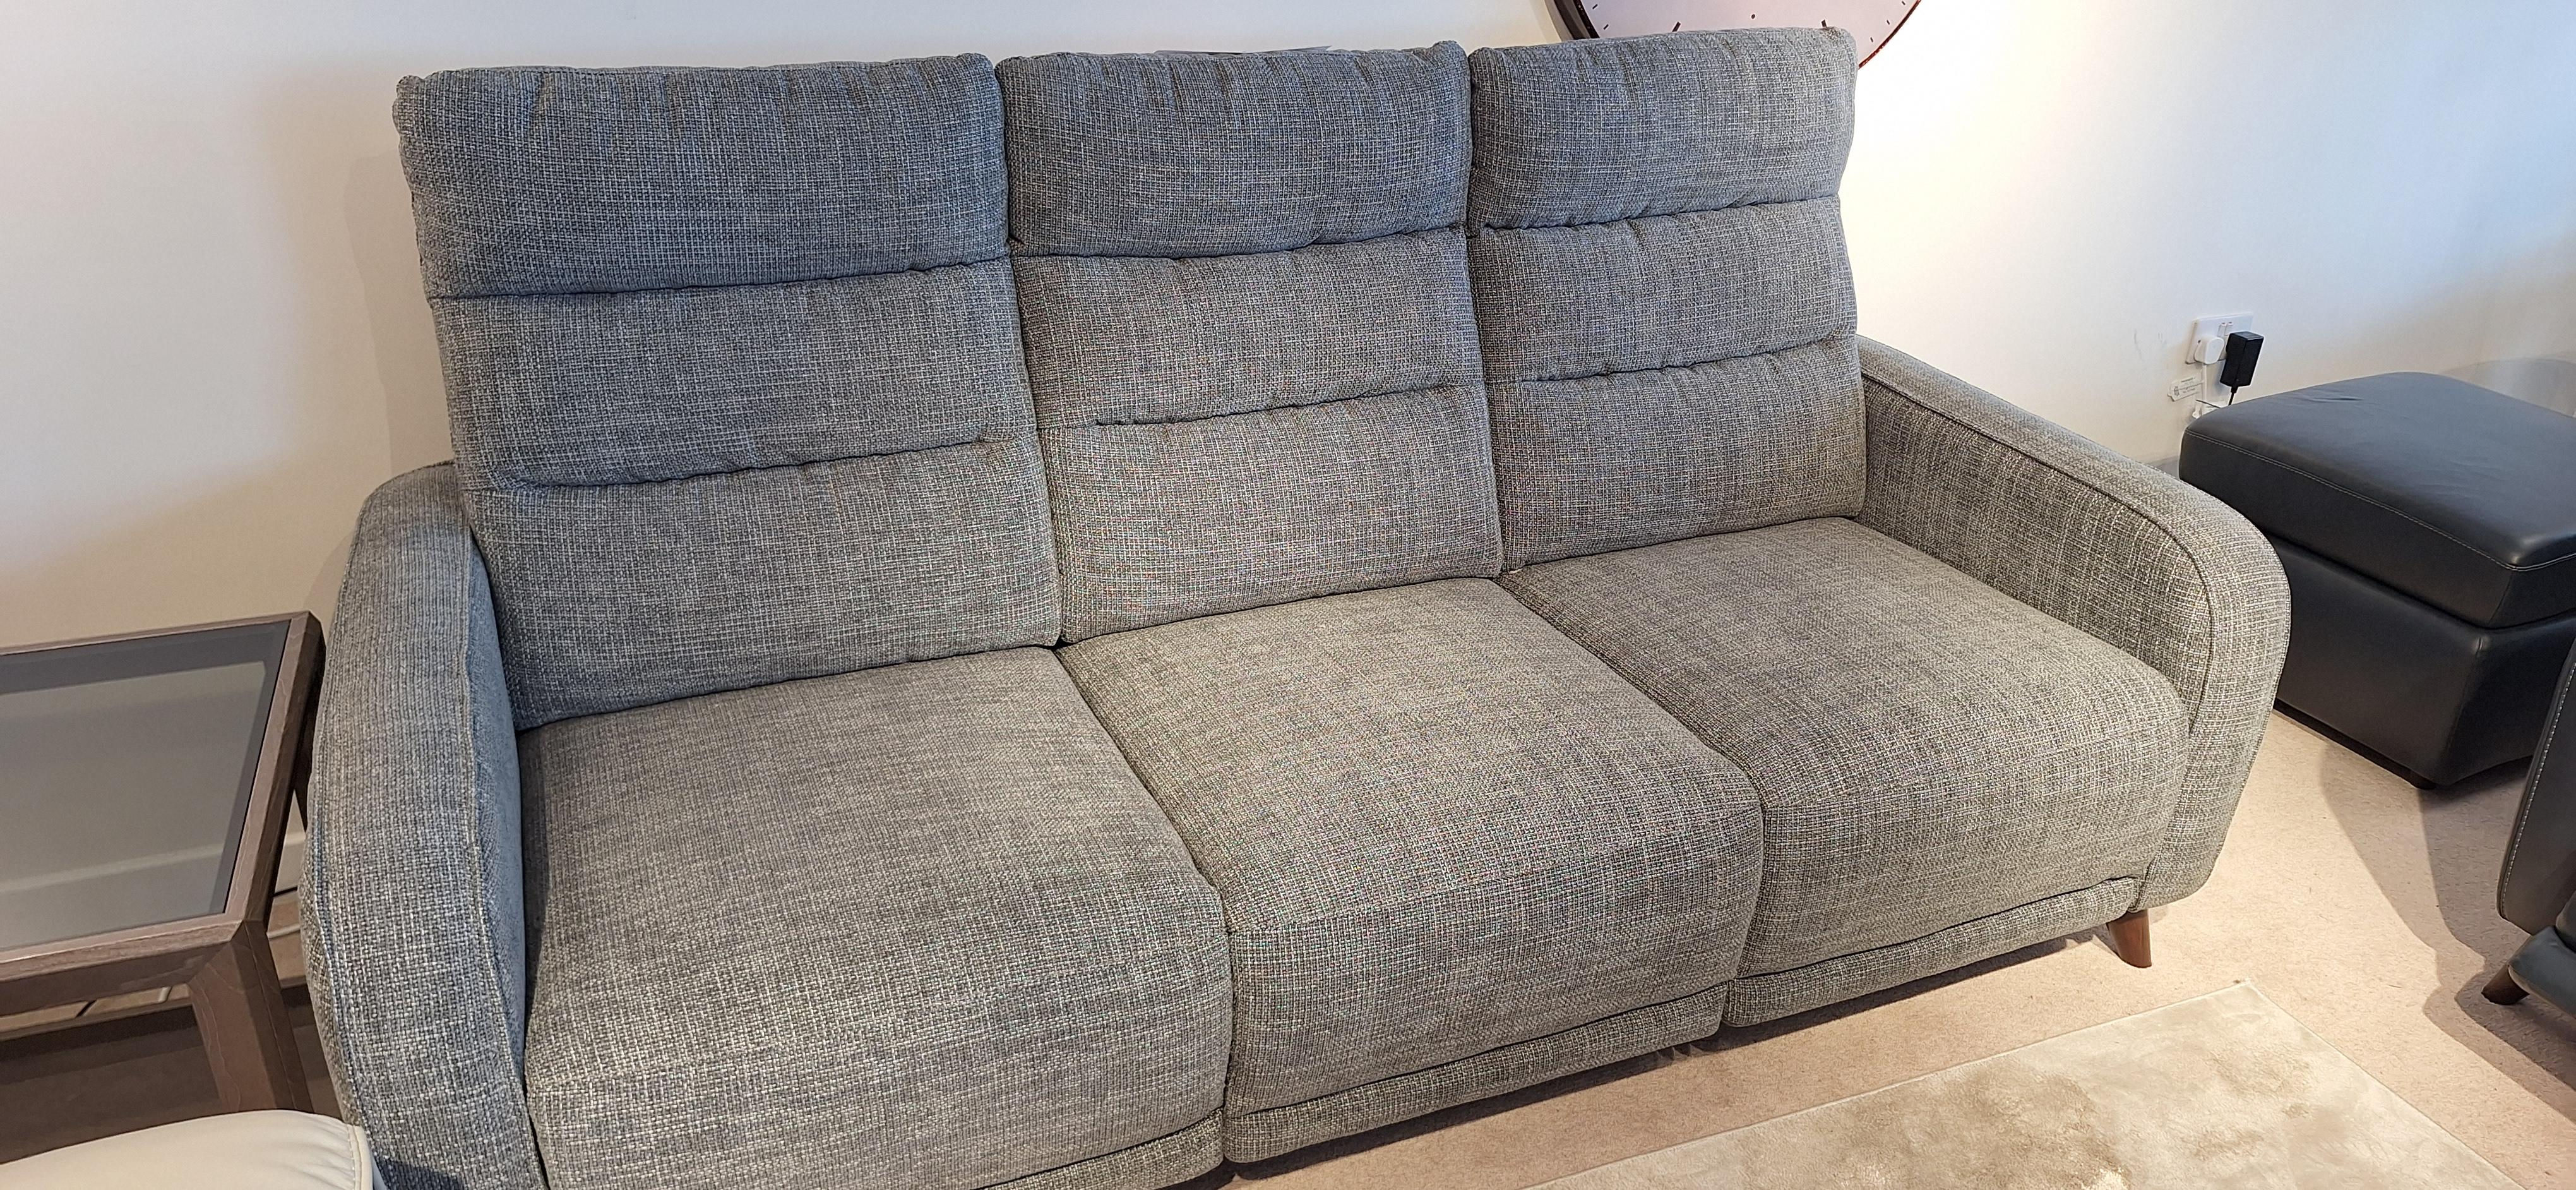 Quinn 3 seater power sofa and power chair in  on Furniture Village